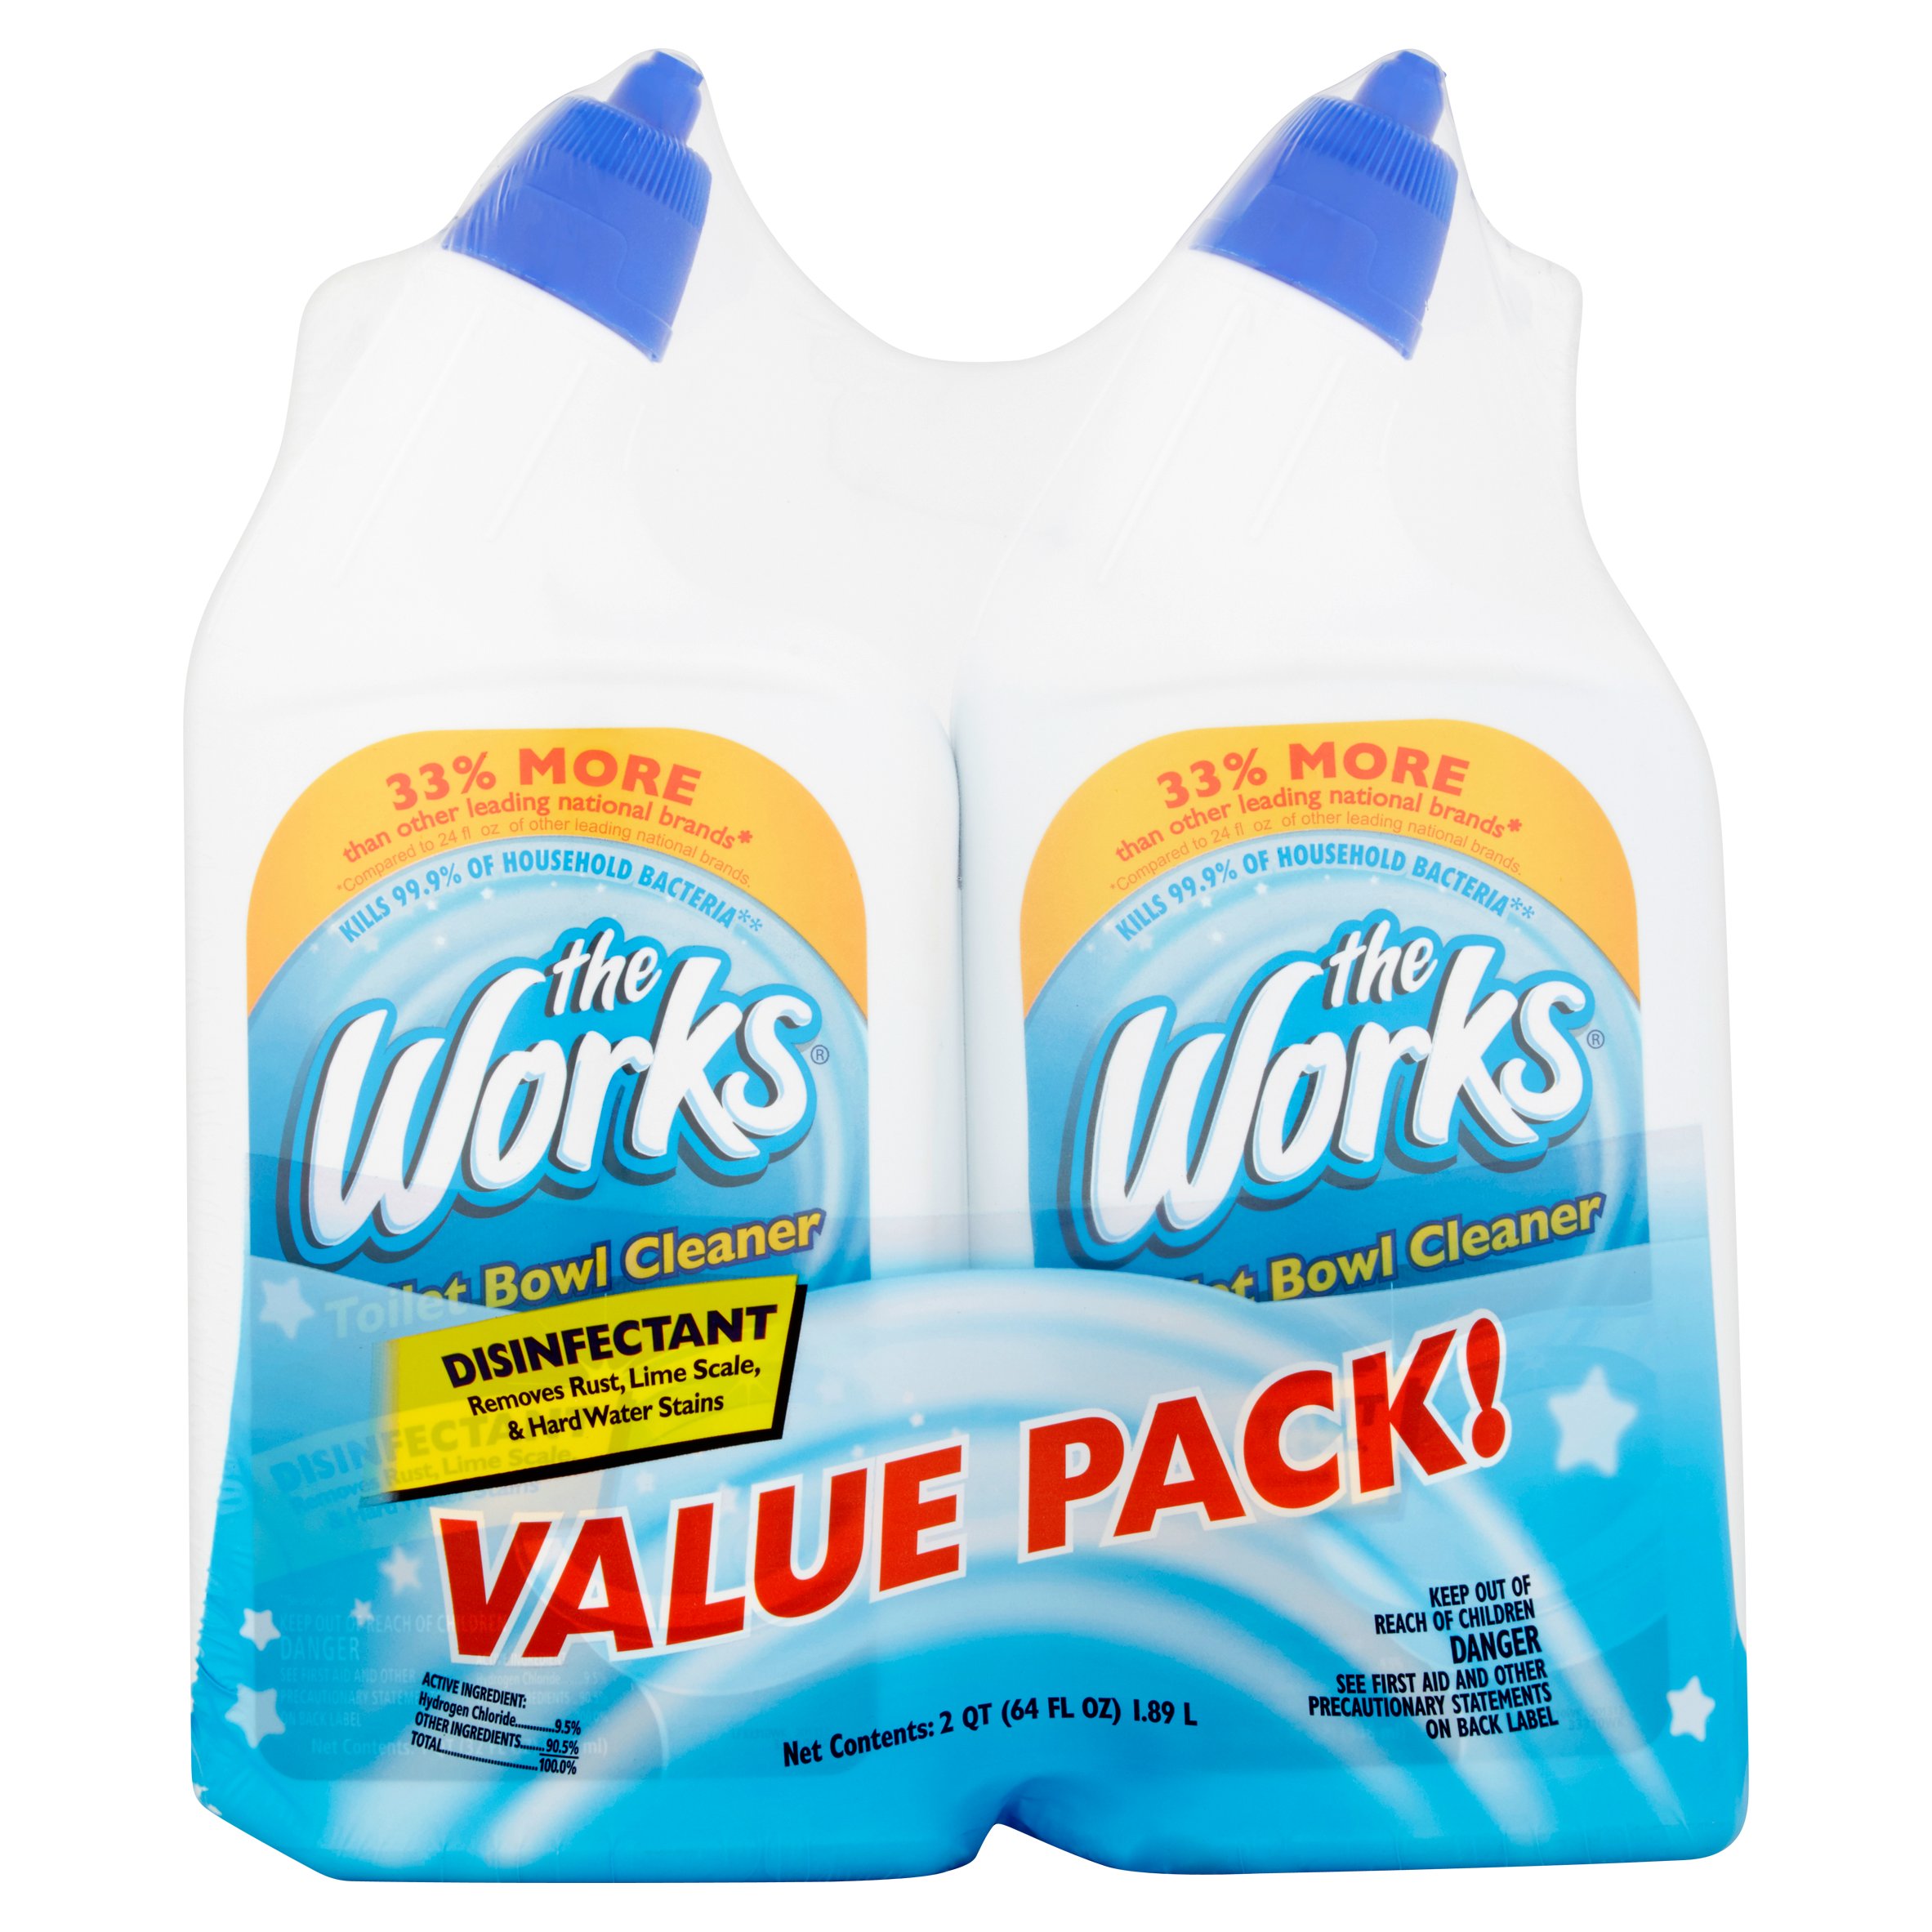 The Works Disinfectant Toilet Bowl Cleaner Value Pack, 64 fl oz - image 1 of 2